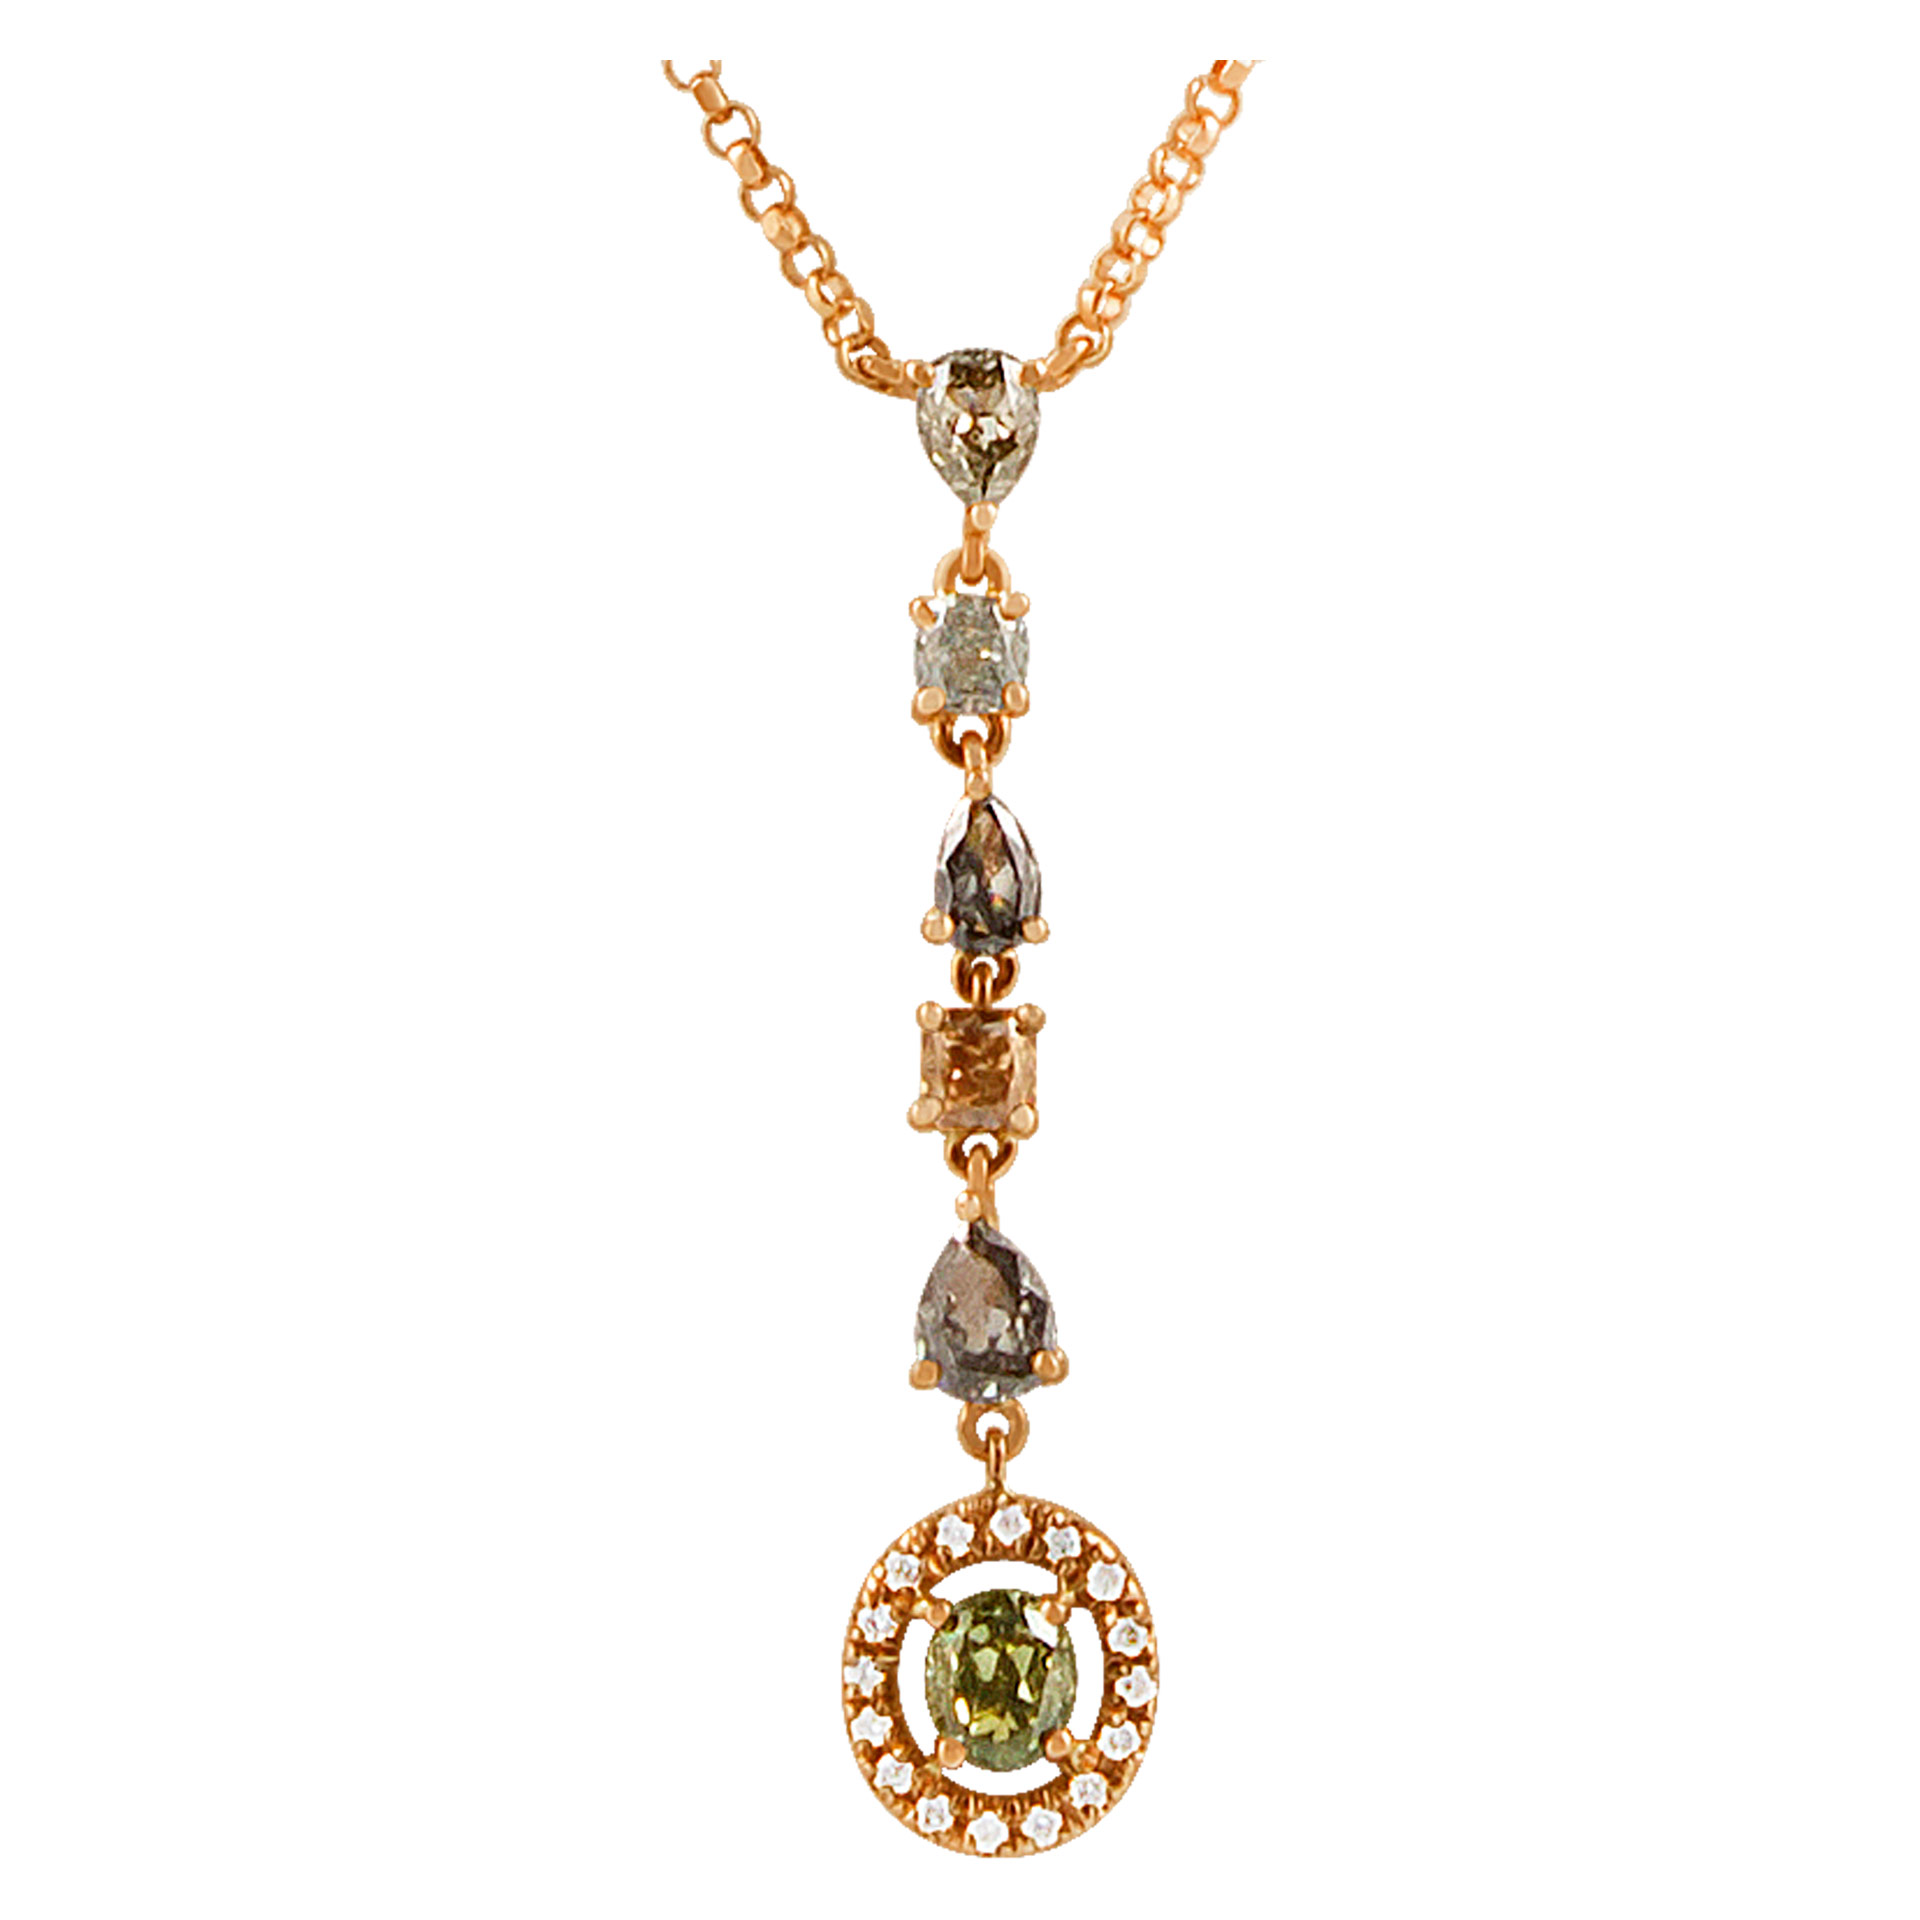 Super sweet diamond necklace in 18k rose gold